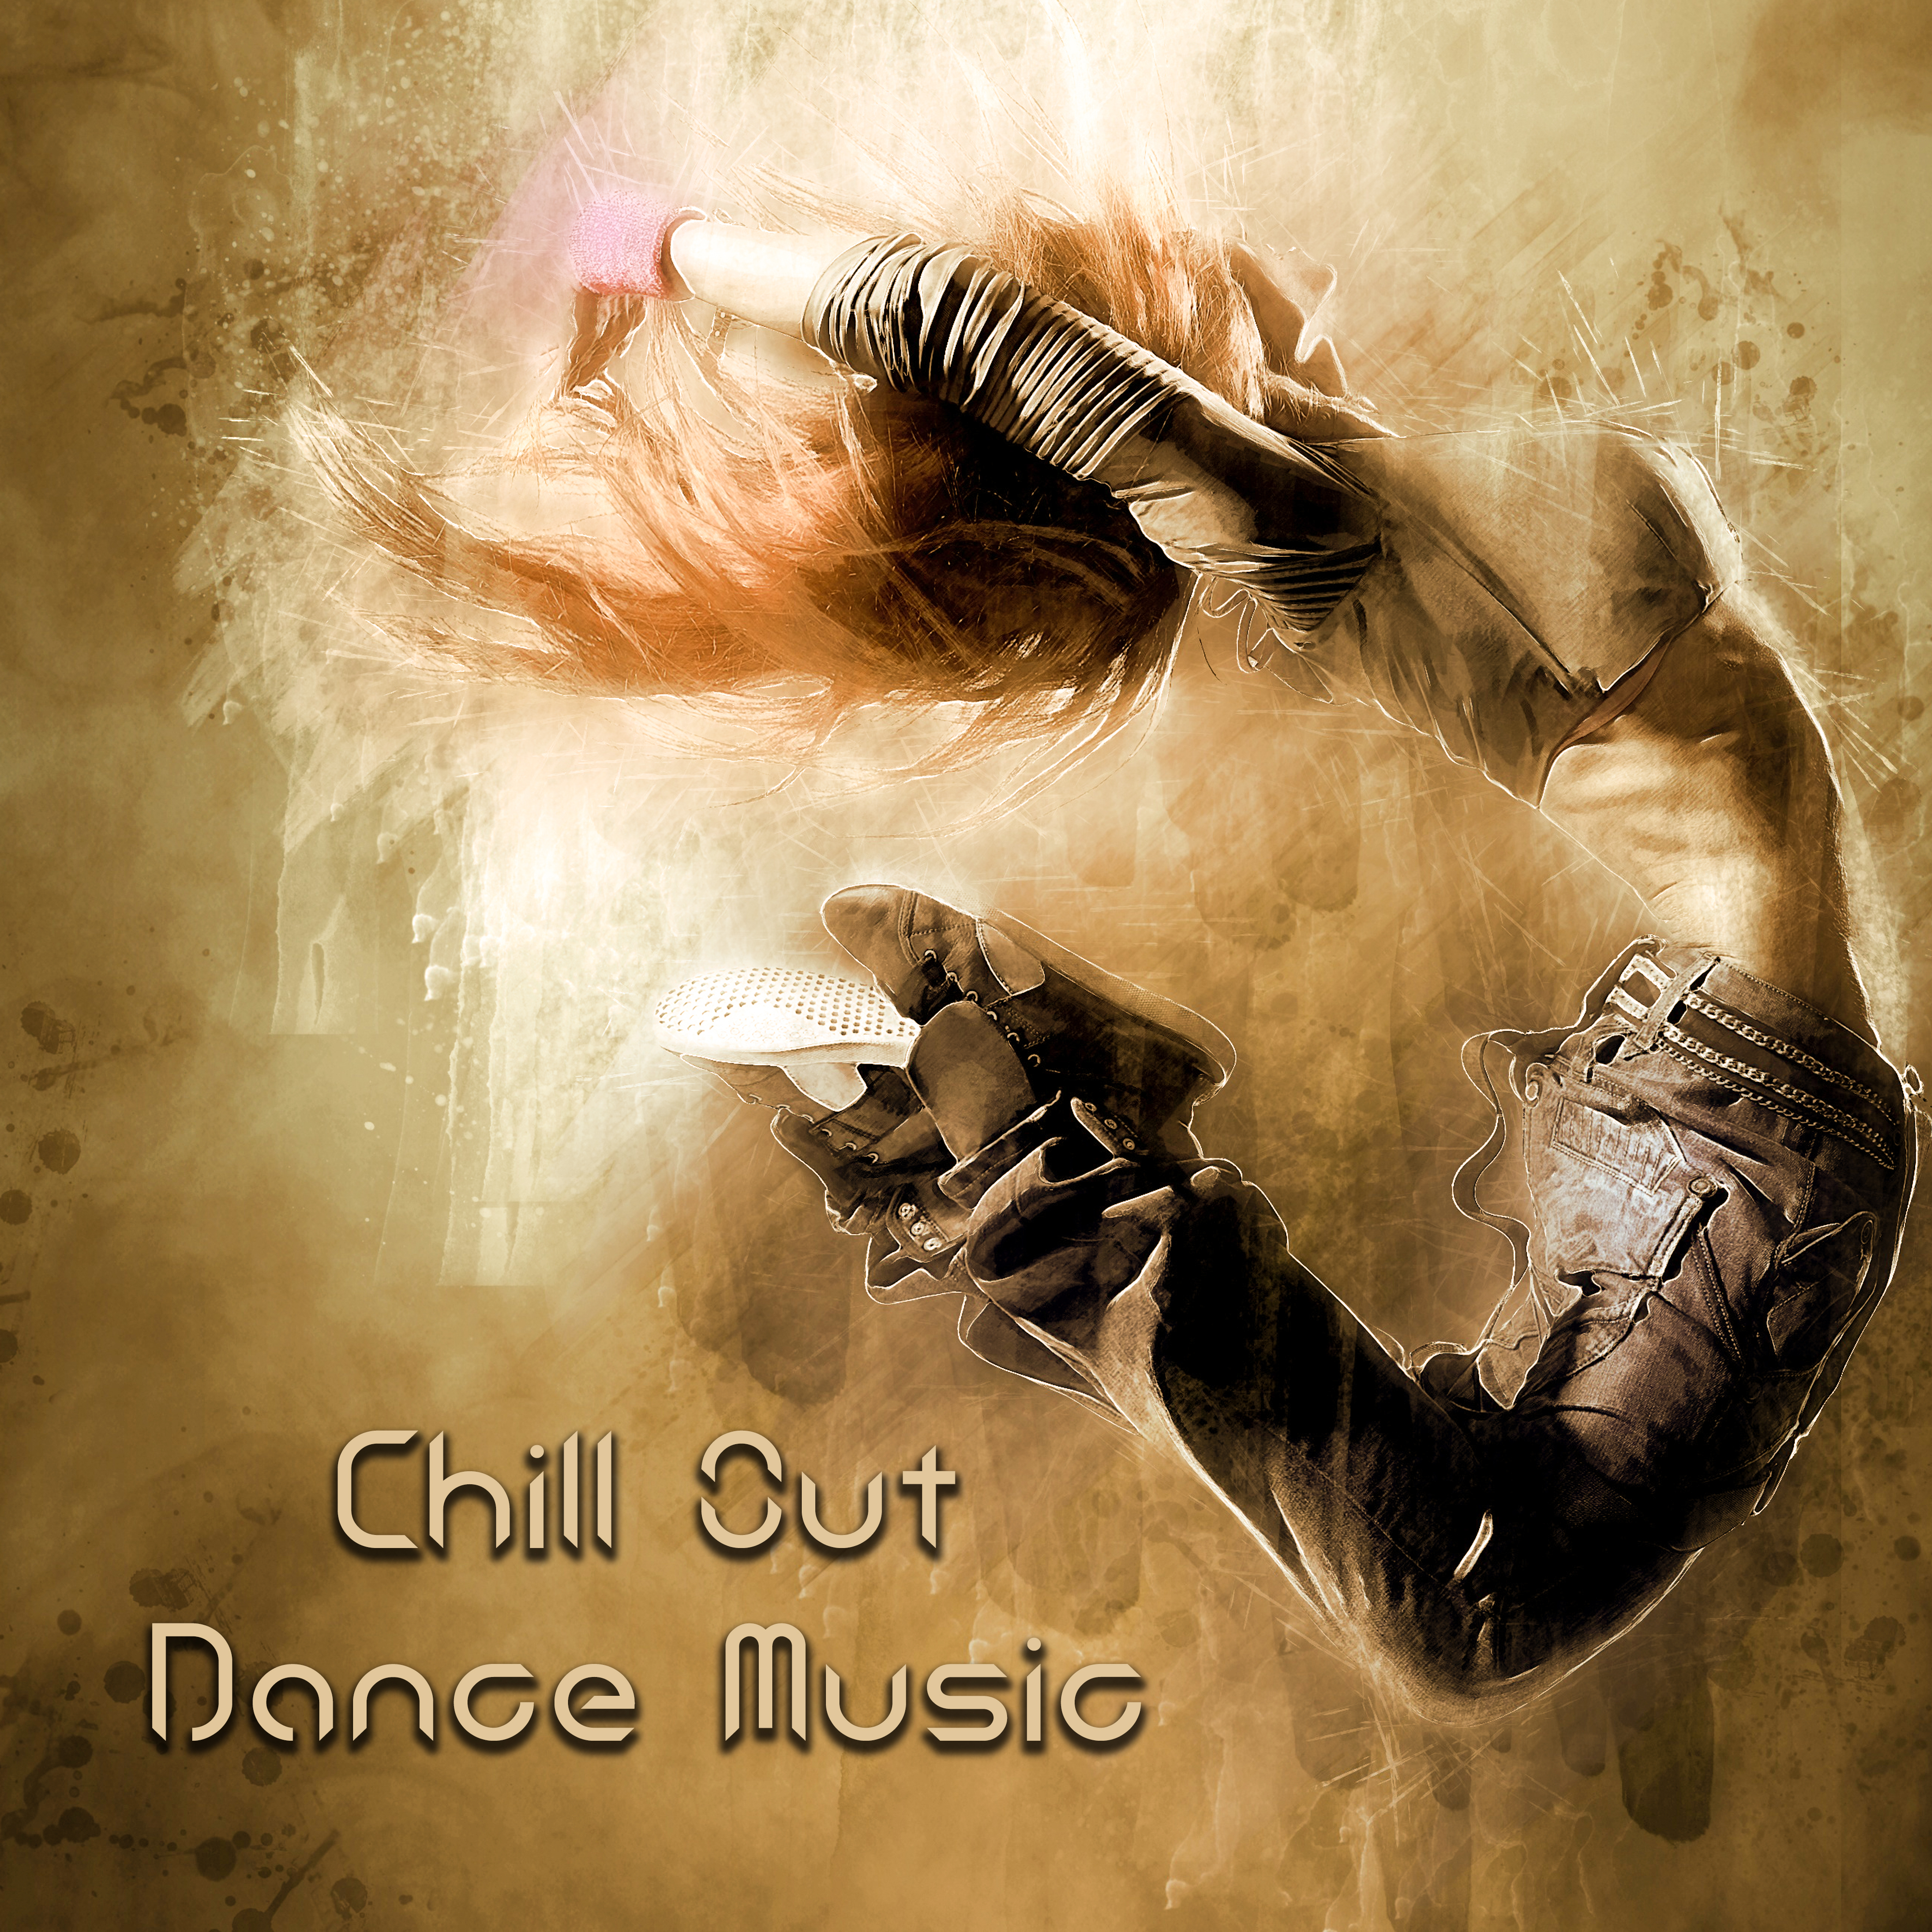 Chill Out Dance Music – Ibiza Party Time, Beach Dancefloor, Summer Sun, Holiday Chill Out Music